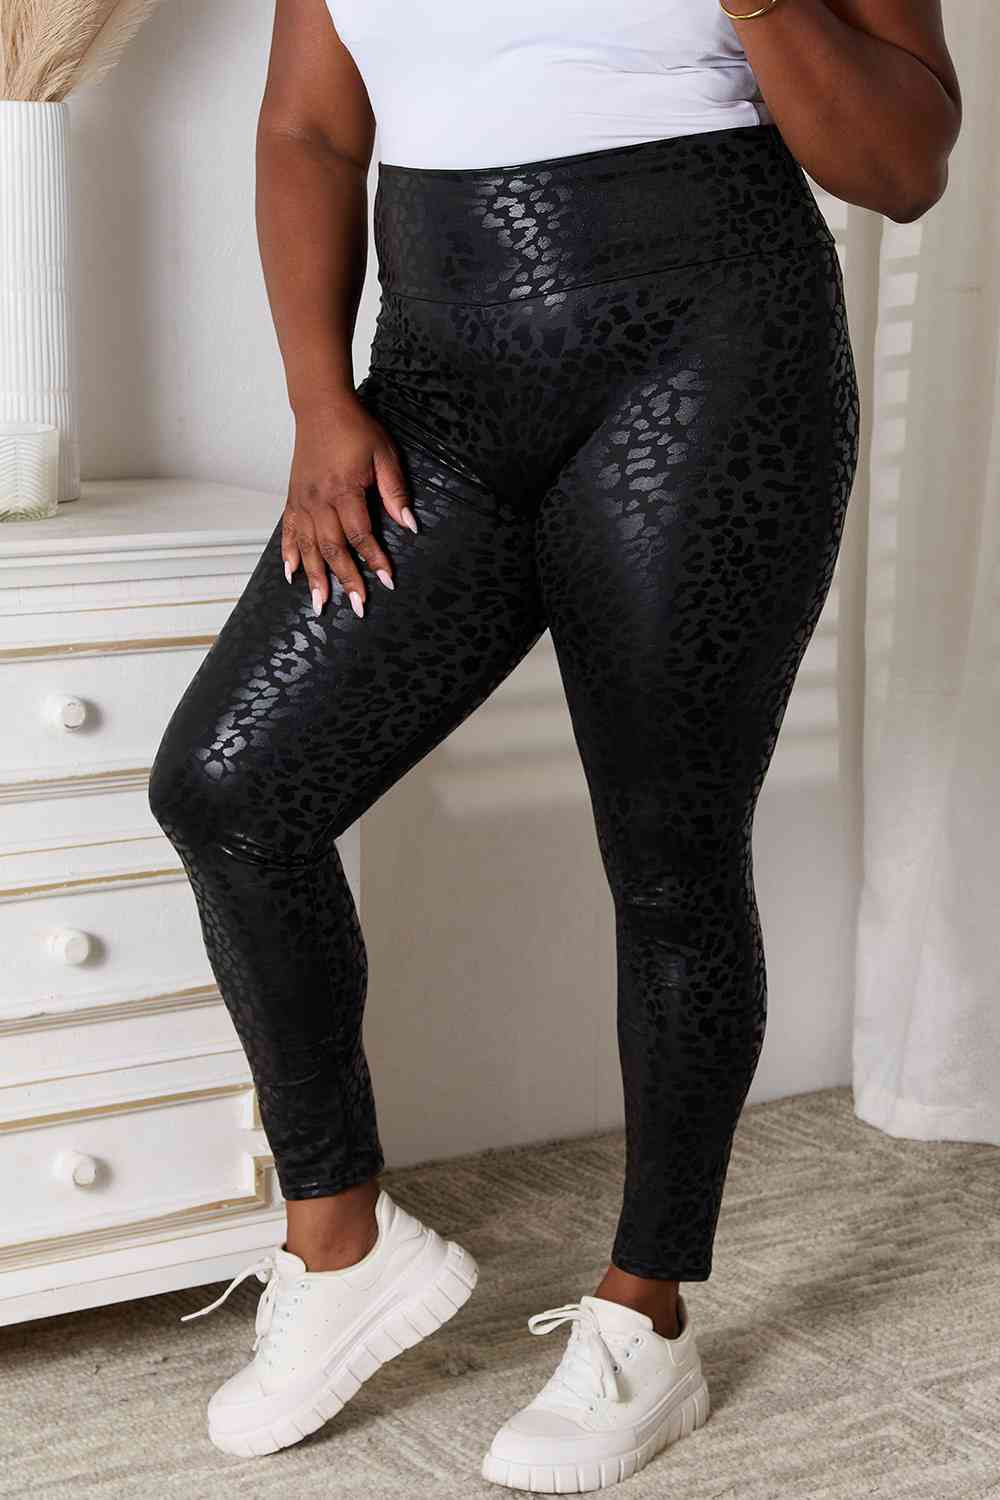 Double Take High Waist Leggings Print on any thing USA/STOD clothes